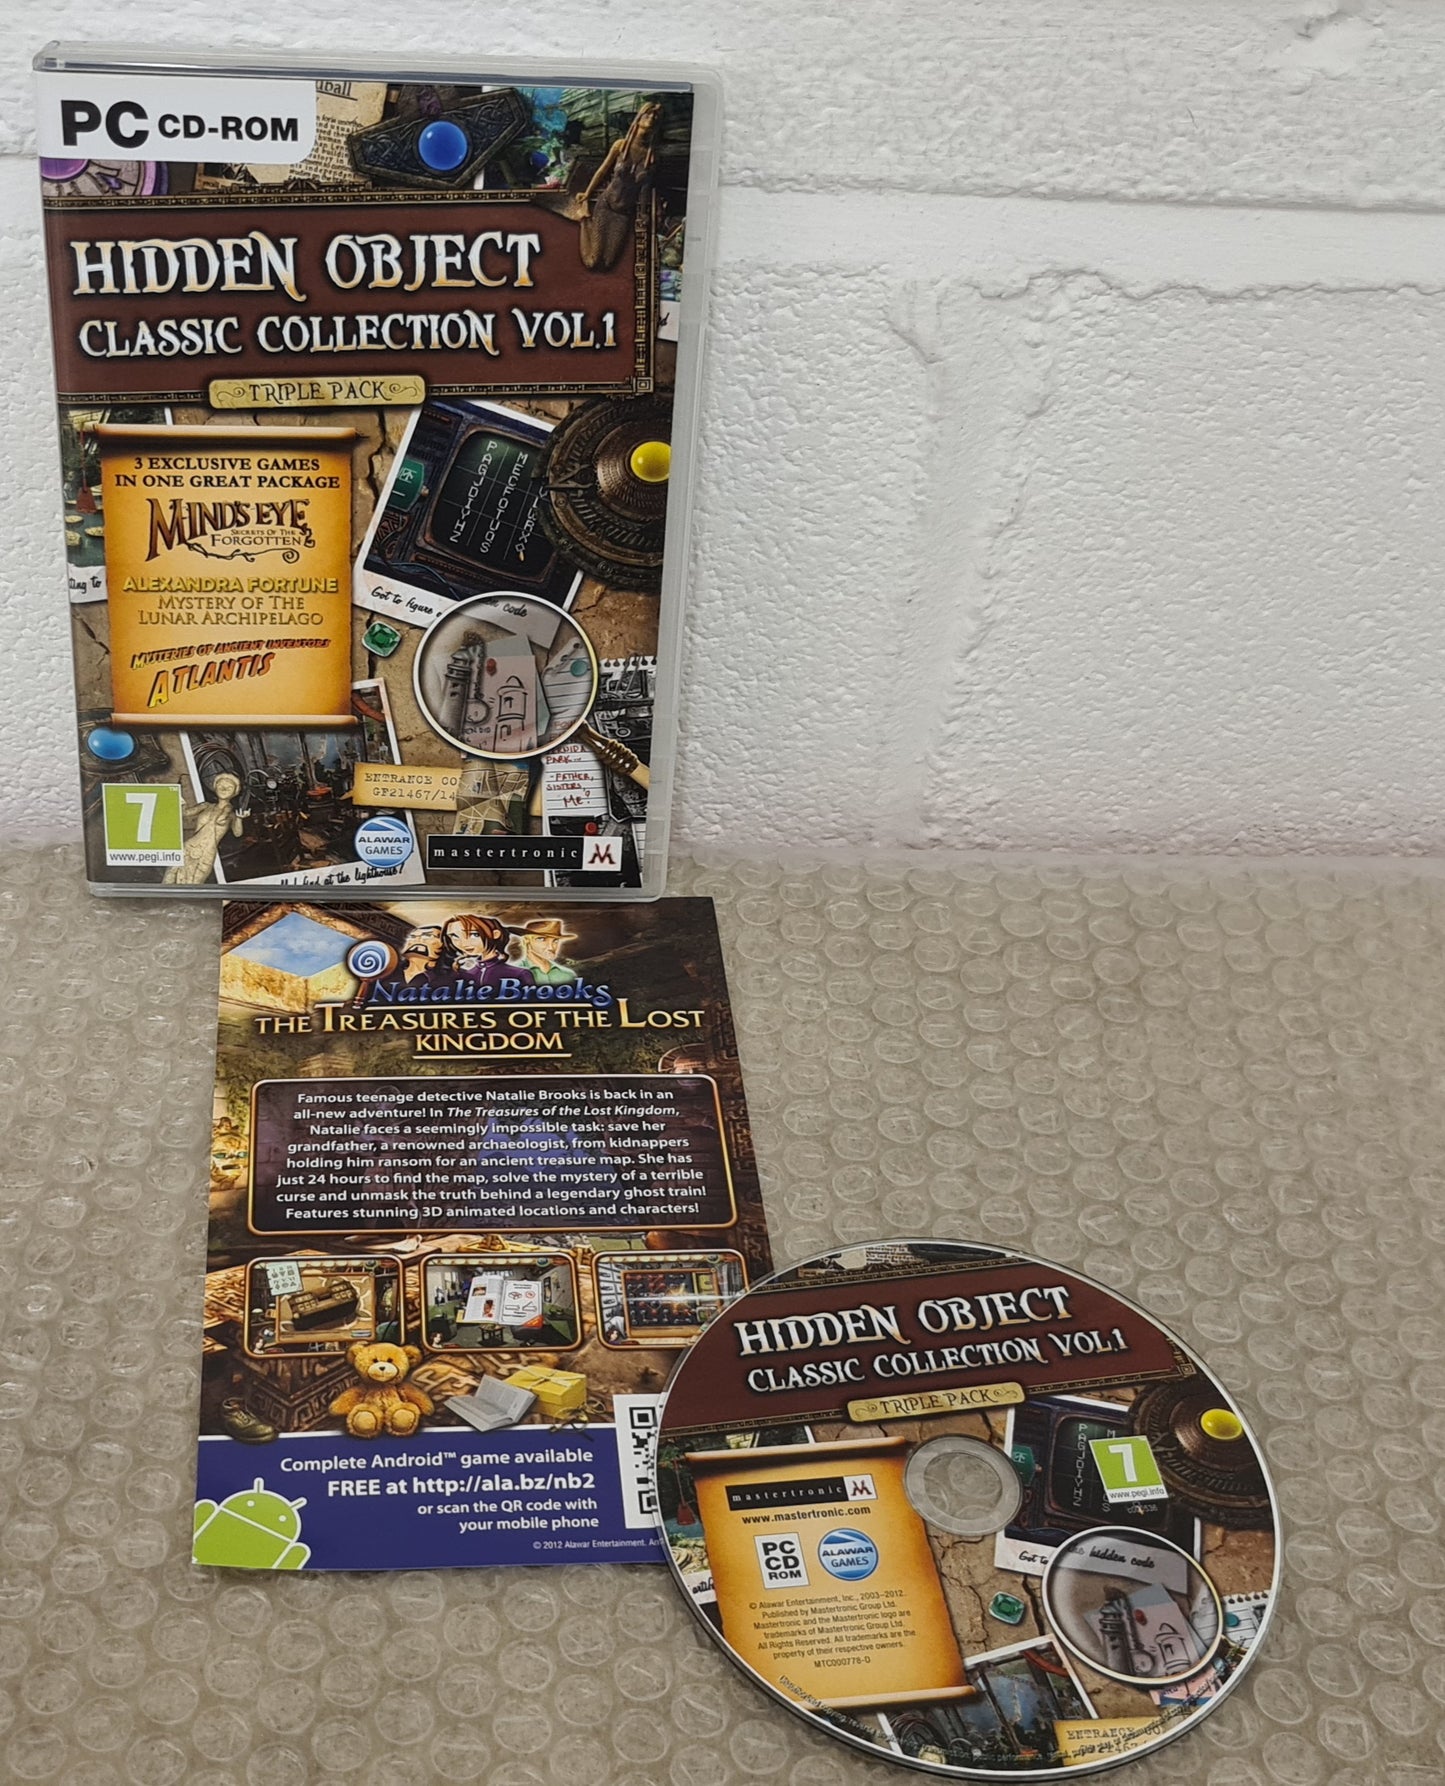 Hidden Object Classic Collection Vol 1 Triple Pack PC Game